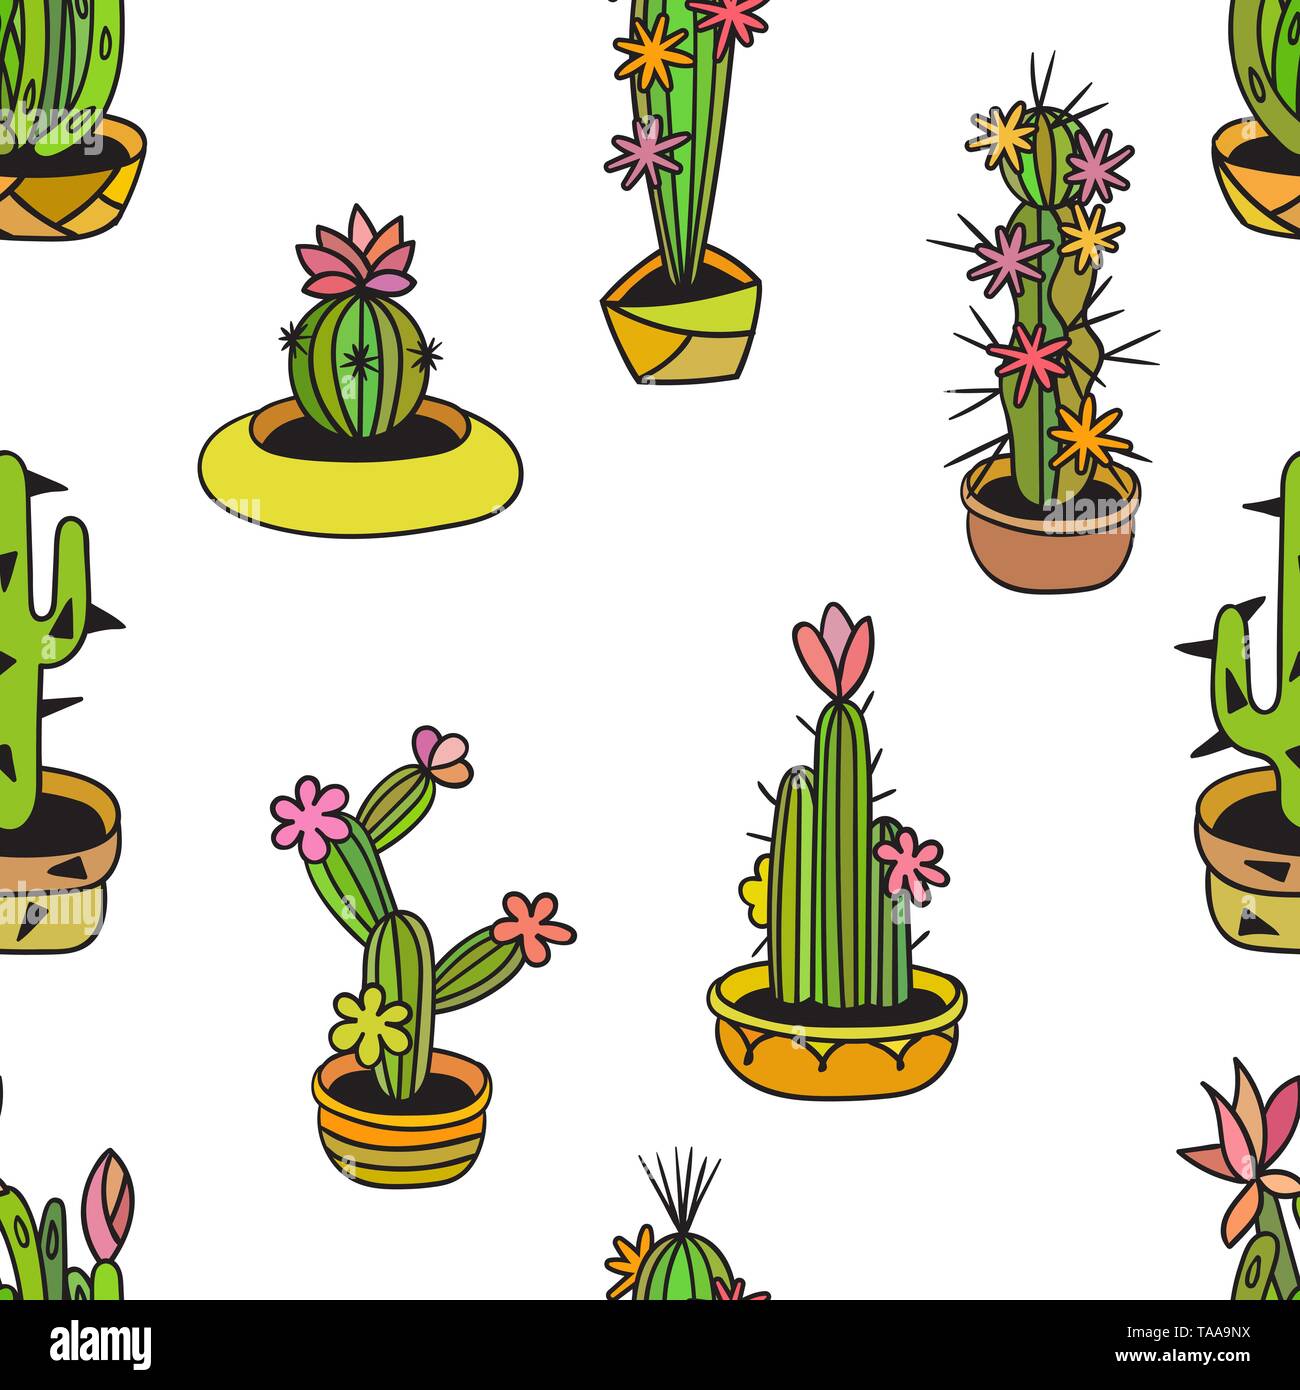 Floral seamless pattern with cactuses Stock Vector